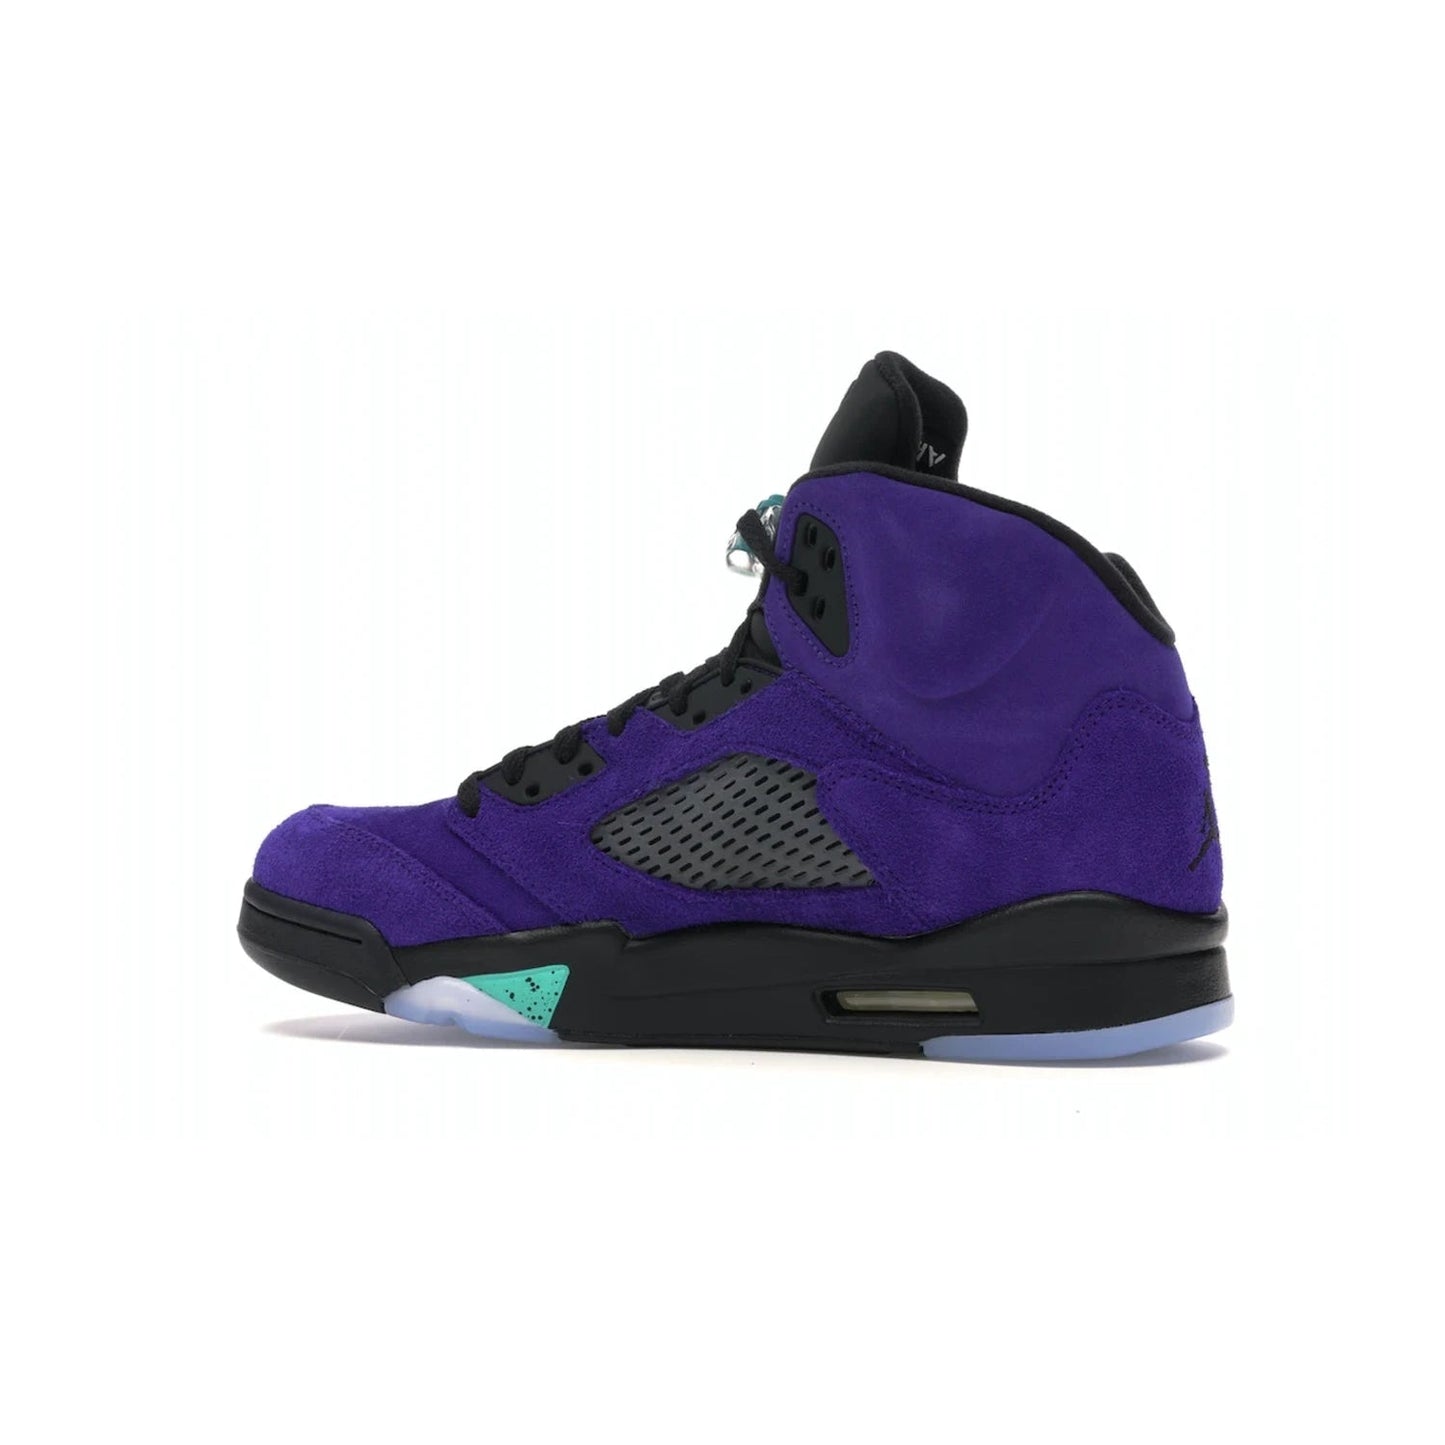 Jordan 5 Retro Alternate Grape - Image 21 - Only at www.BallersClubKickz.com - Bring the classic Jordan 5 Retro Alternate Grape to your sneaker collection! Featuring a purple suede upper, charcoal underlays, green detailing, and an icy and green outsole. Releasing for the first time since 1990, don't miss this chance to add a piece of sneaker history to your collection.